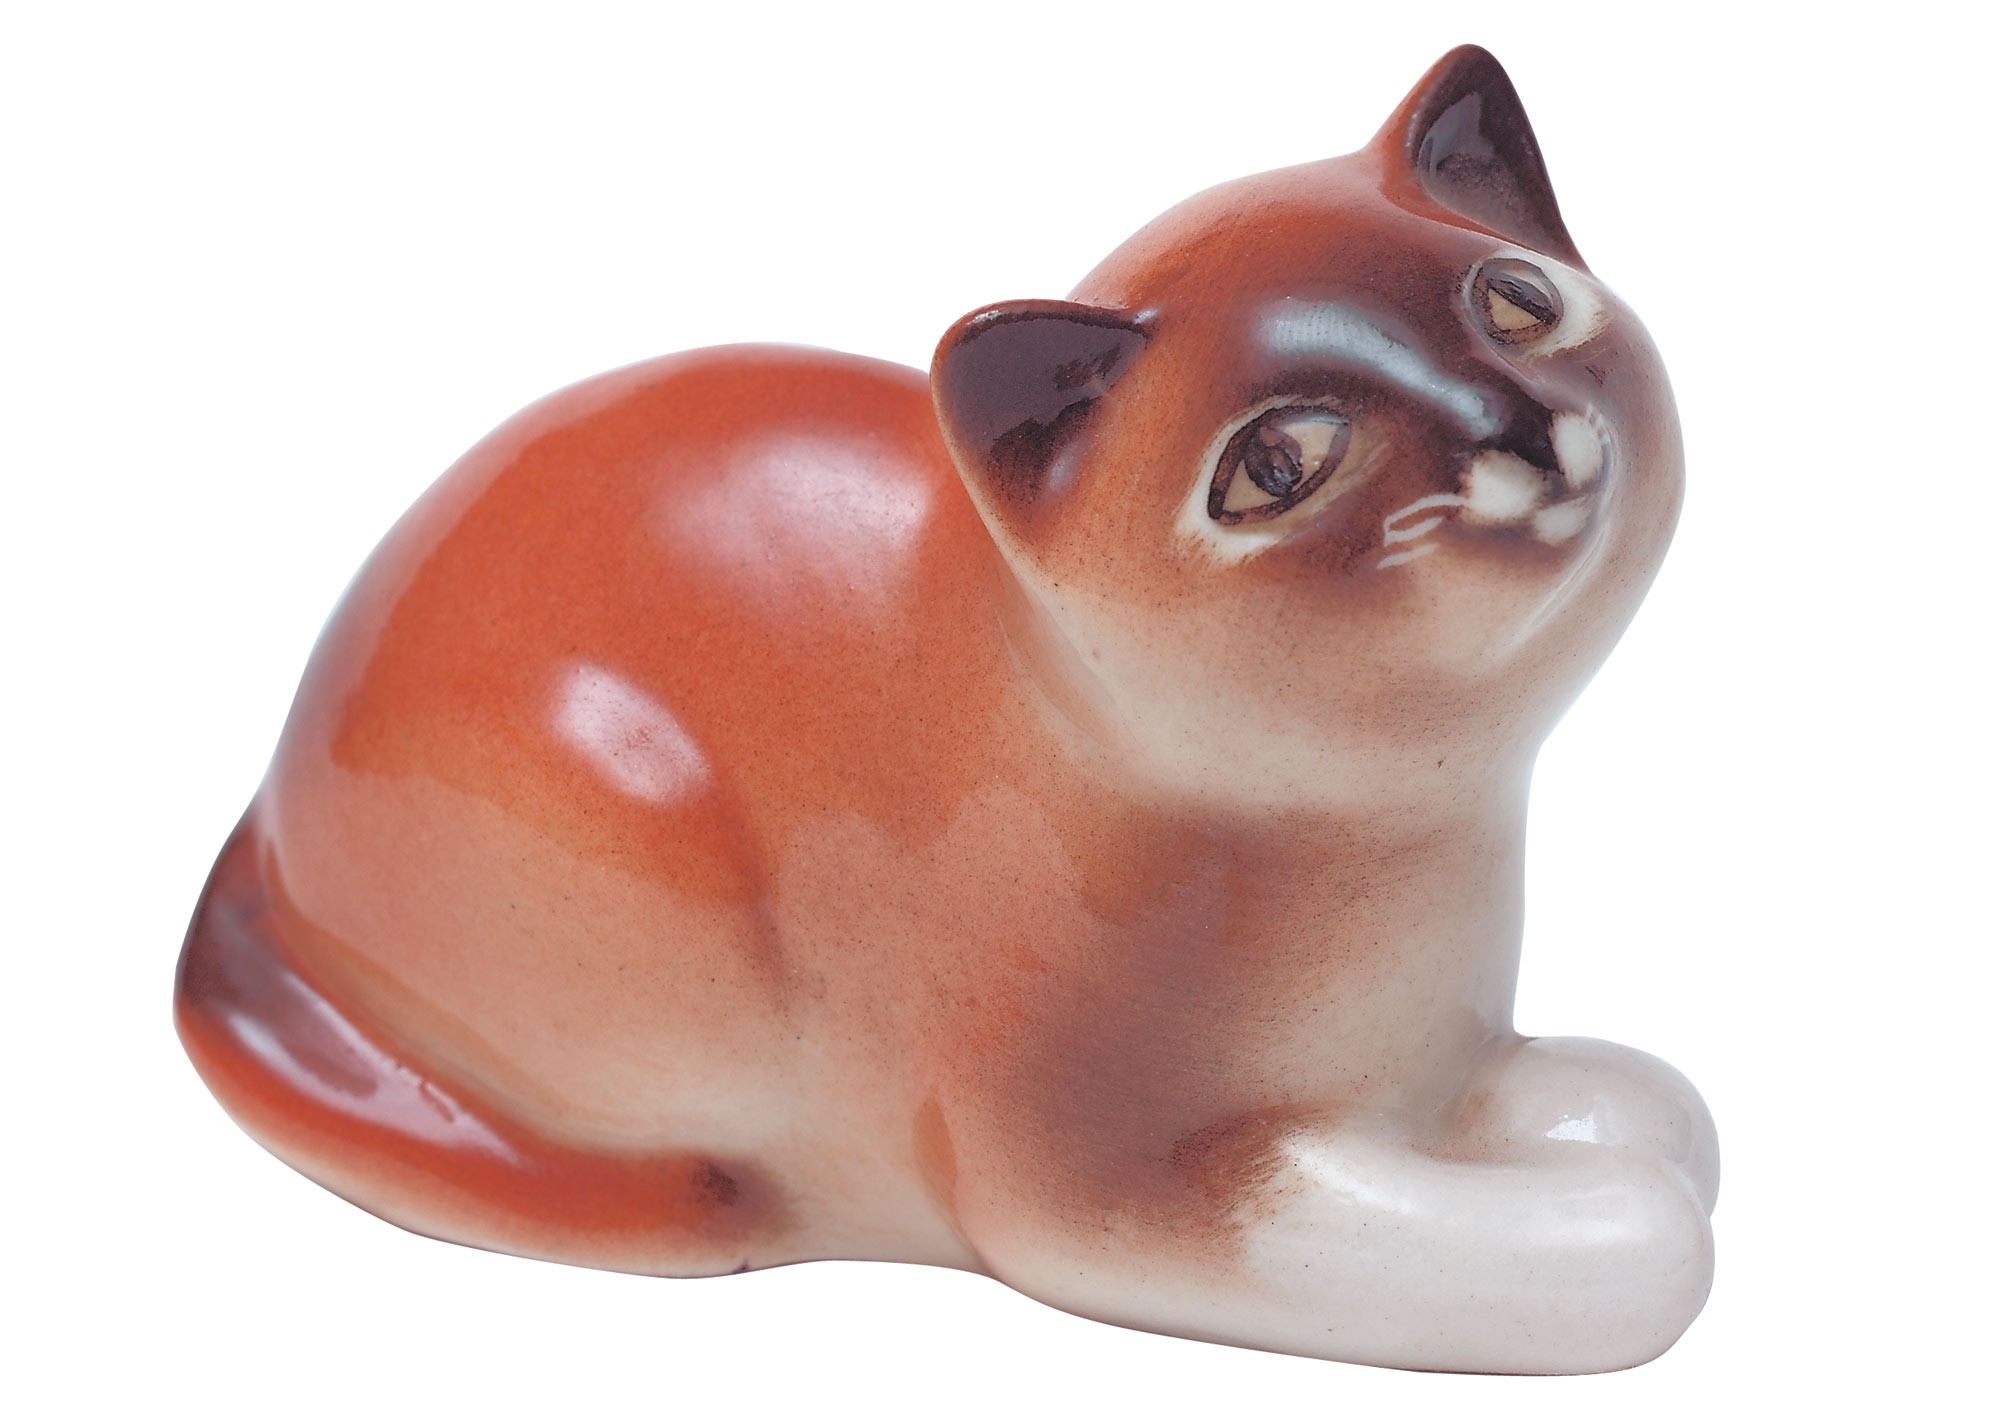 Why sit and look at kitten pictures when you could take this Lomonosov  porcelain kitten figurine home with you today?